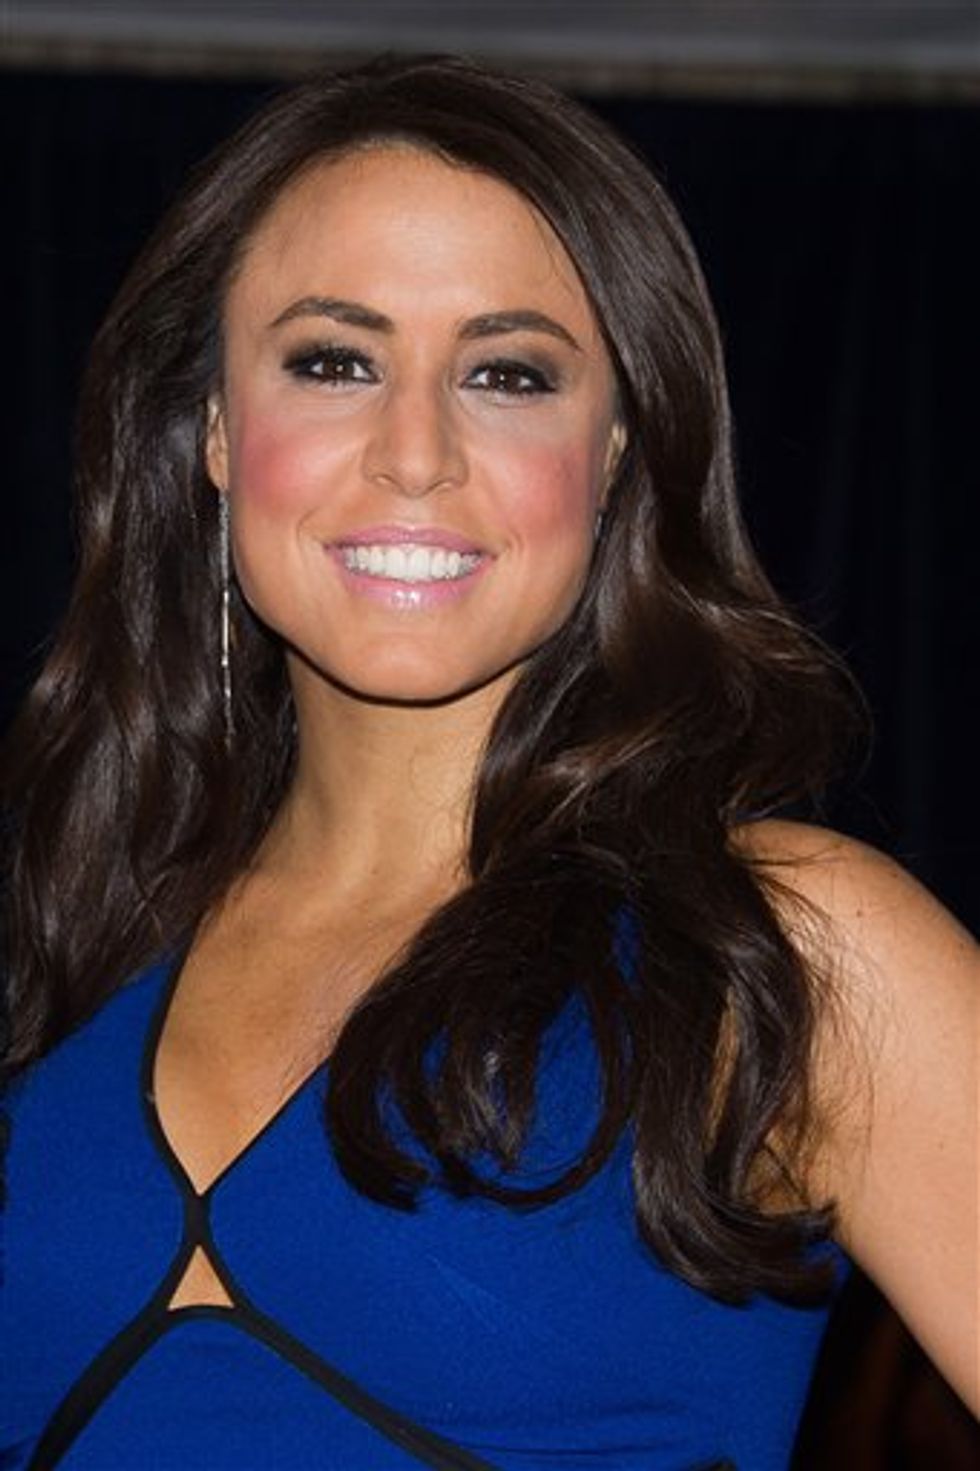 Former Fox Host Andrea Tantaros Challenges Network Executives to Take Lie Detector Tests